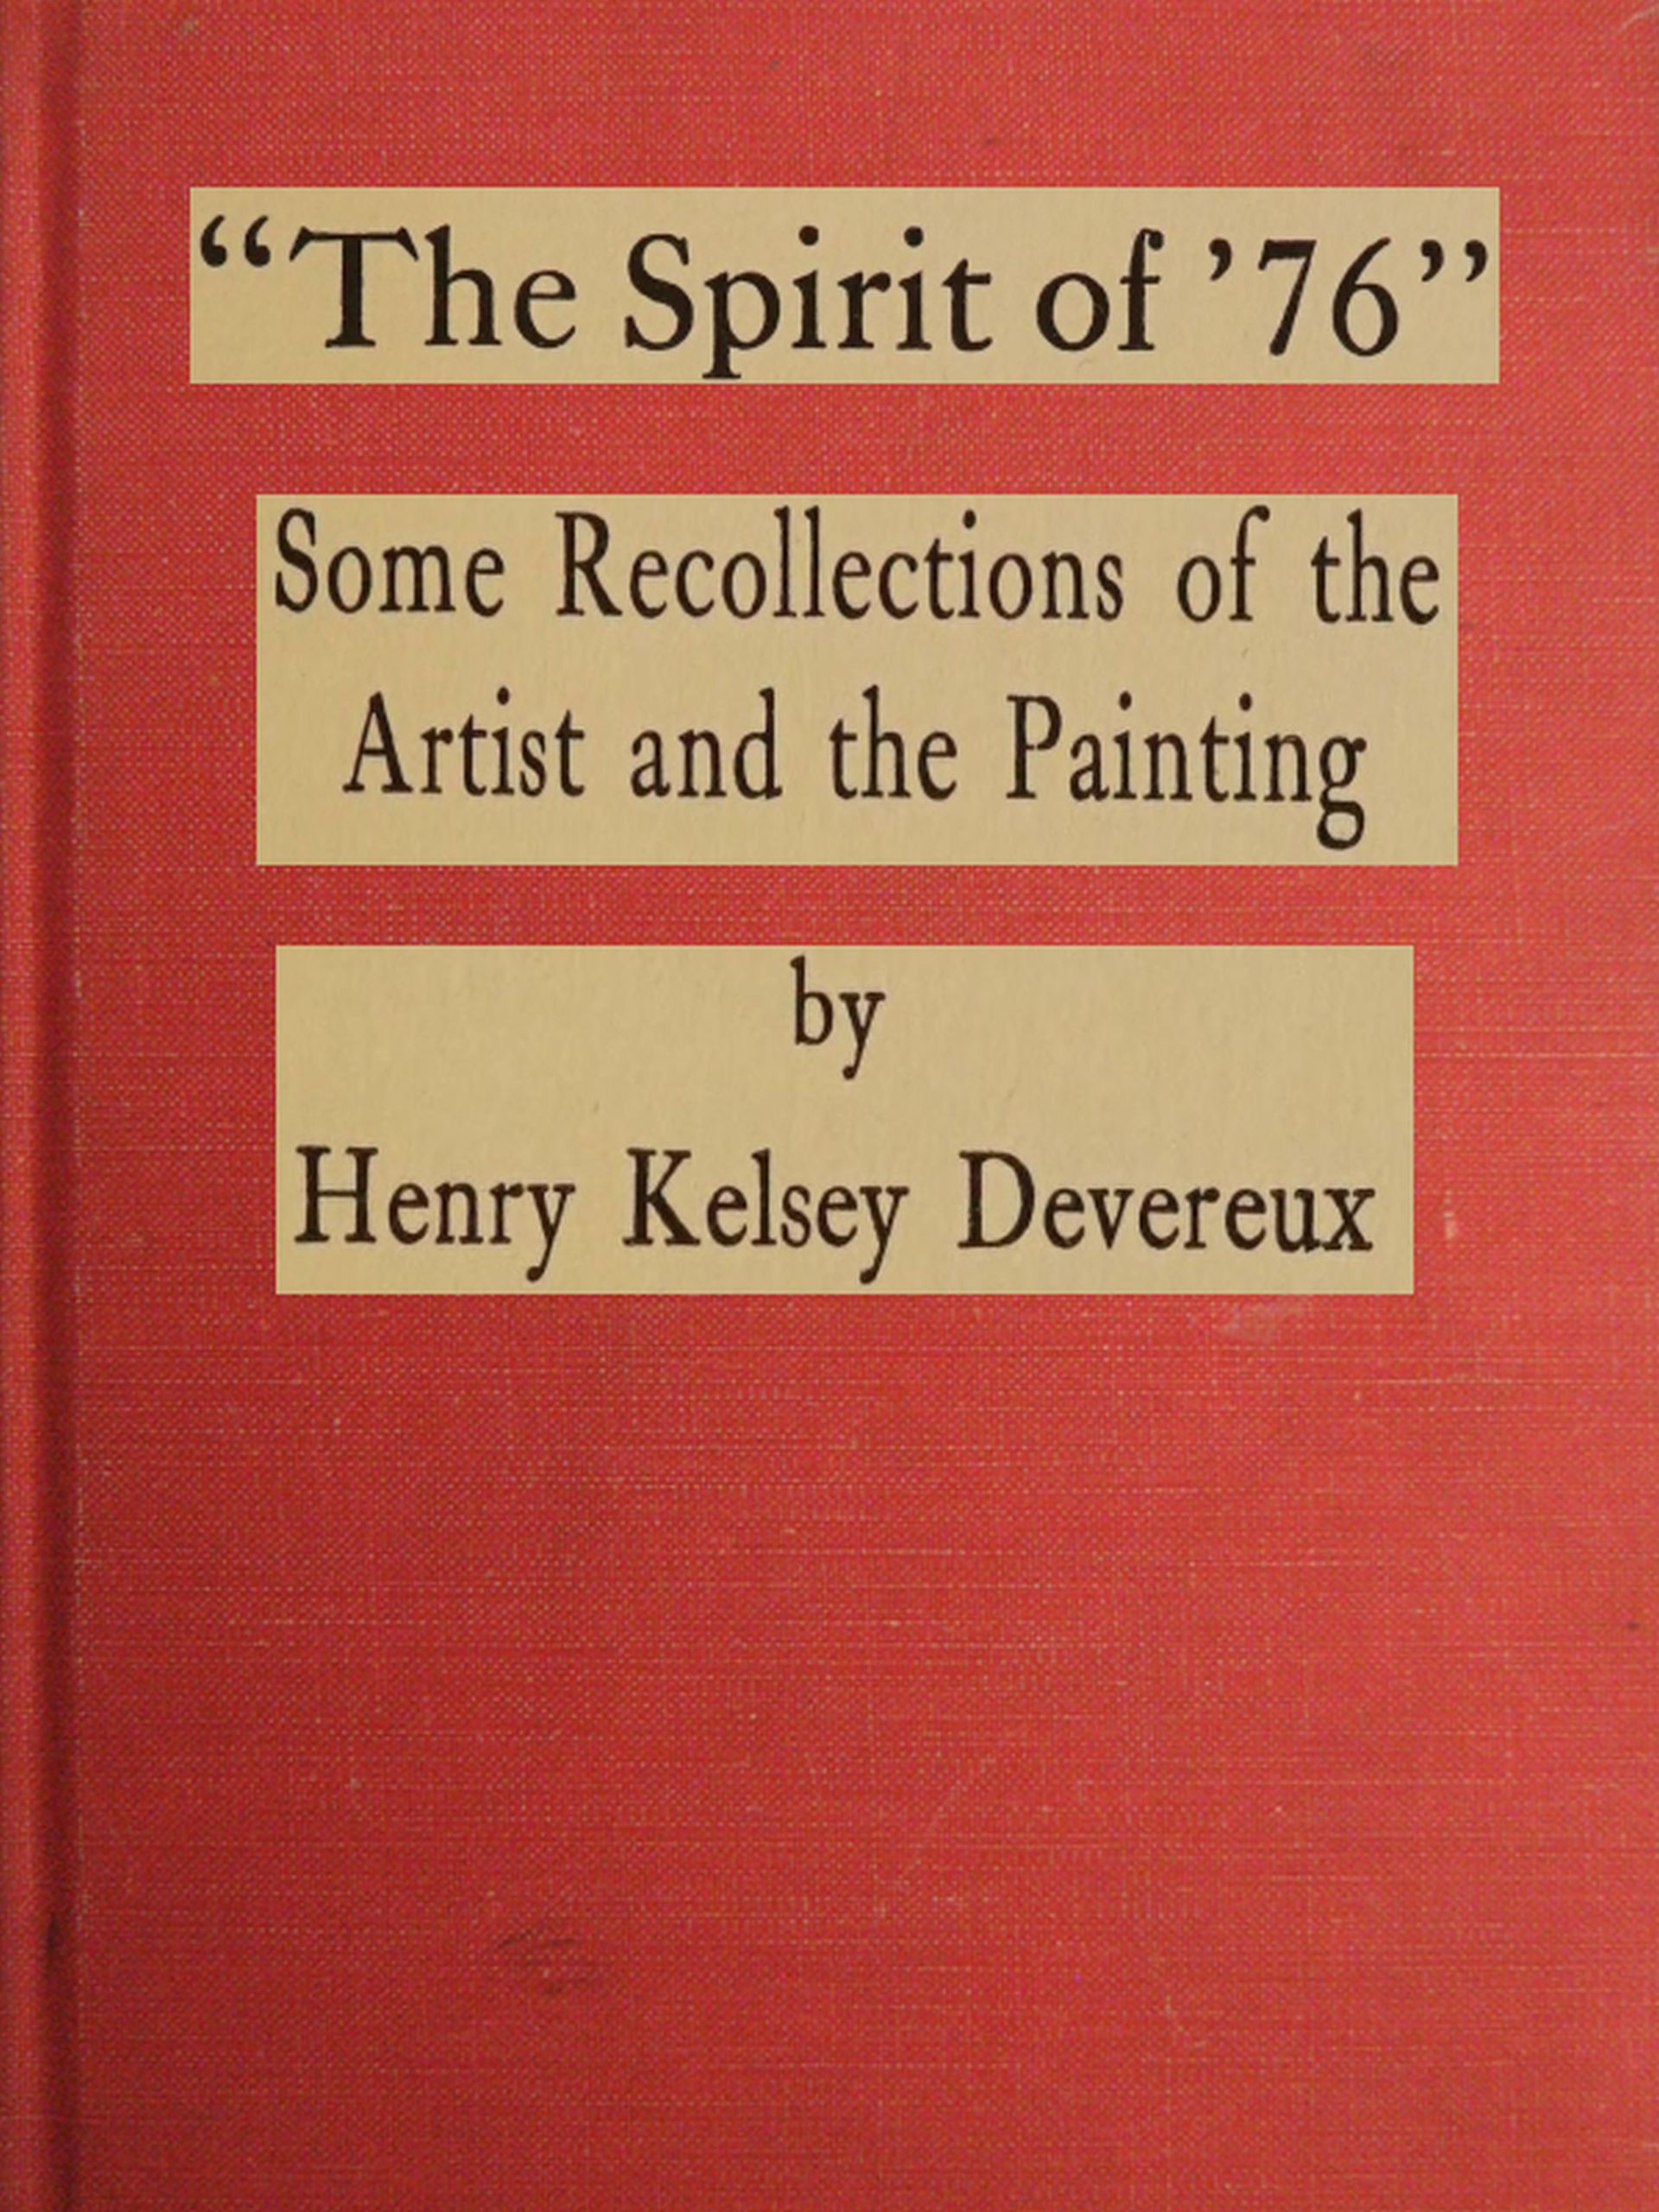 "The spirit of '76": Some recollections of the artist and the painting